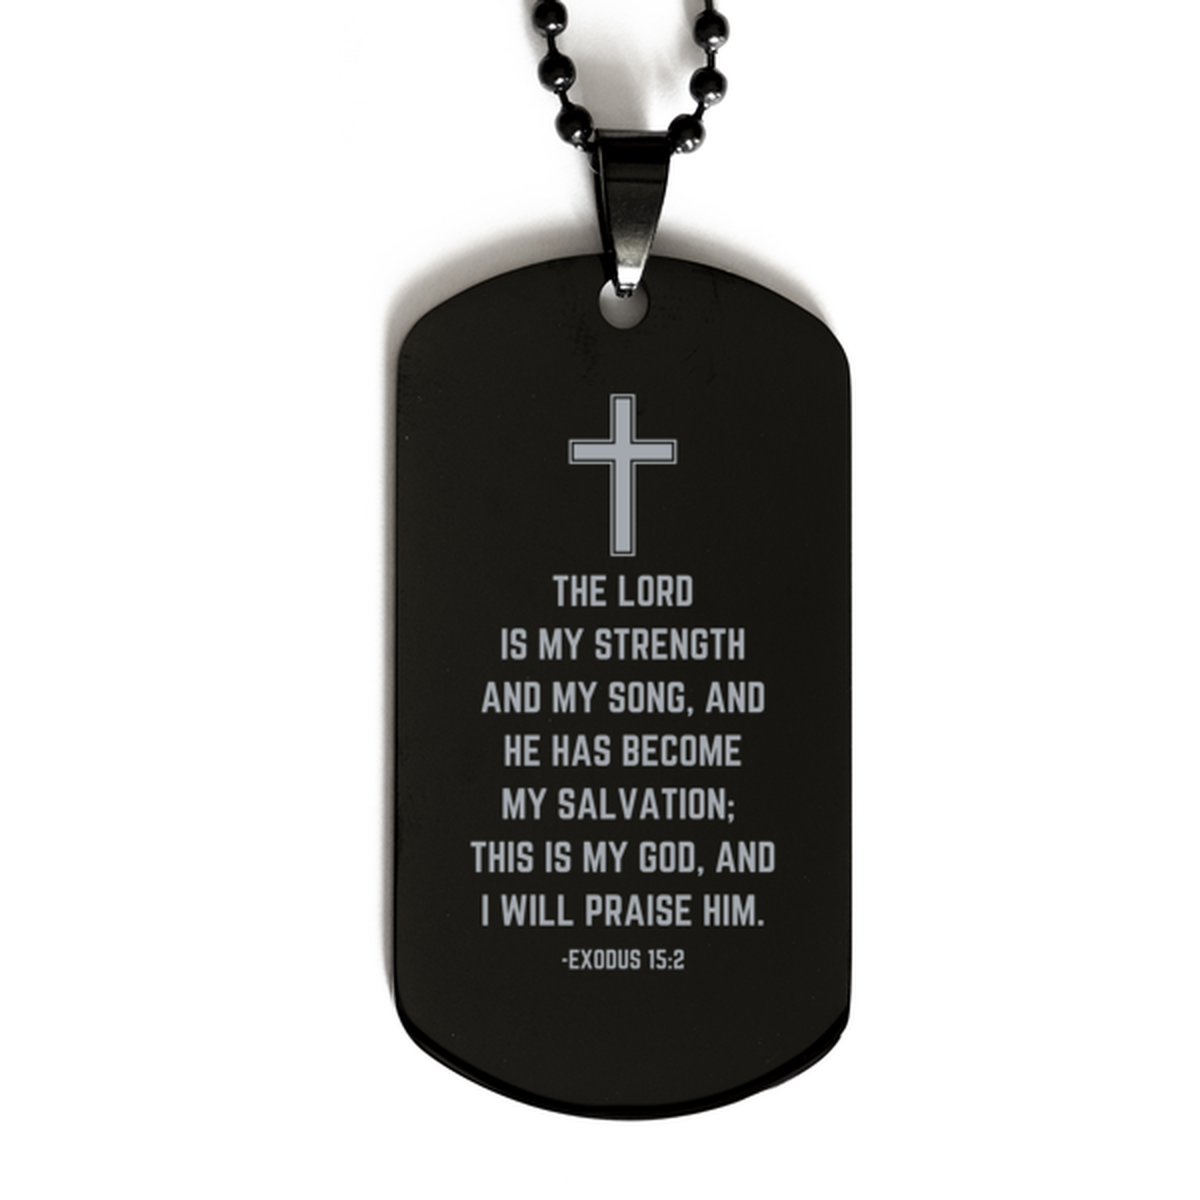 Baptism Gifts For Teenage Boys Girls, Christian Bible Verse Black Dog Tag, The Lord is my strength, Confirmation Gifts, Bible Verse Necklace for Son, Godson, Grandson, Nephew